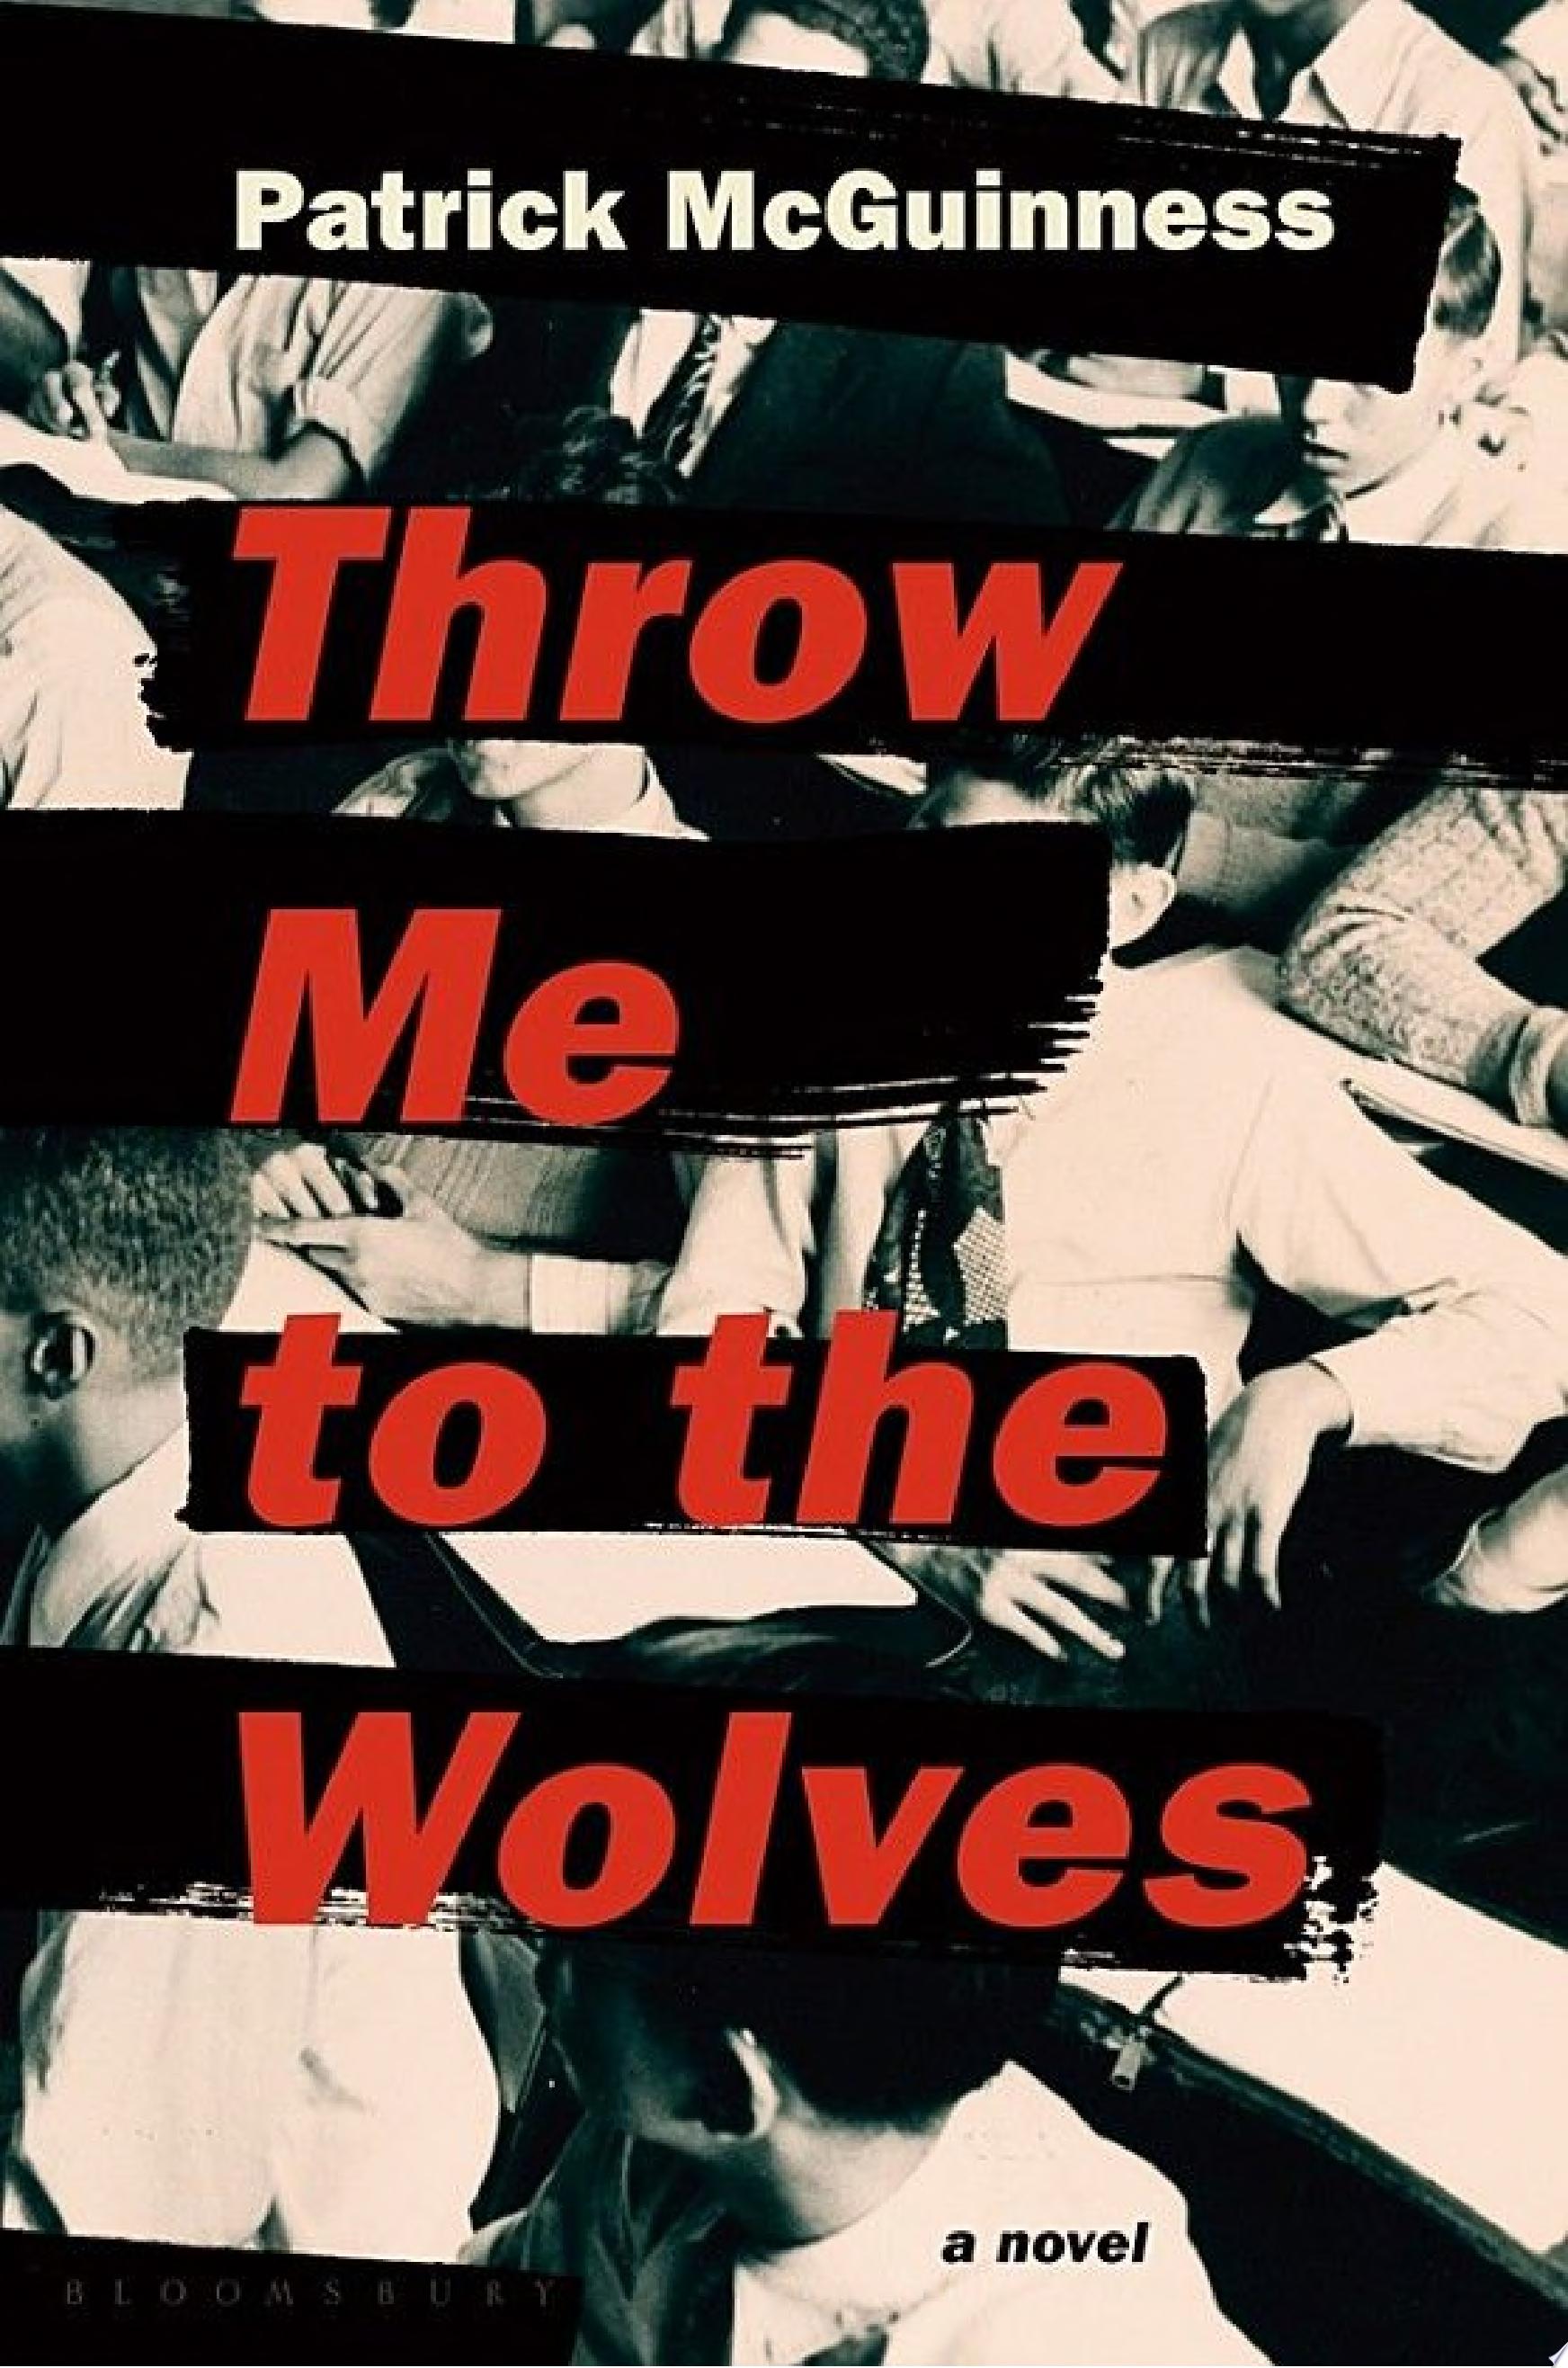 Image for "Throw Me to the Wolves"